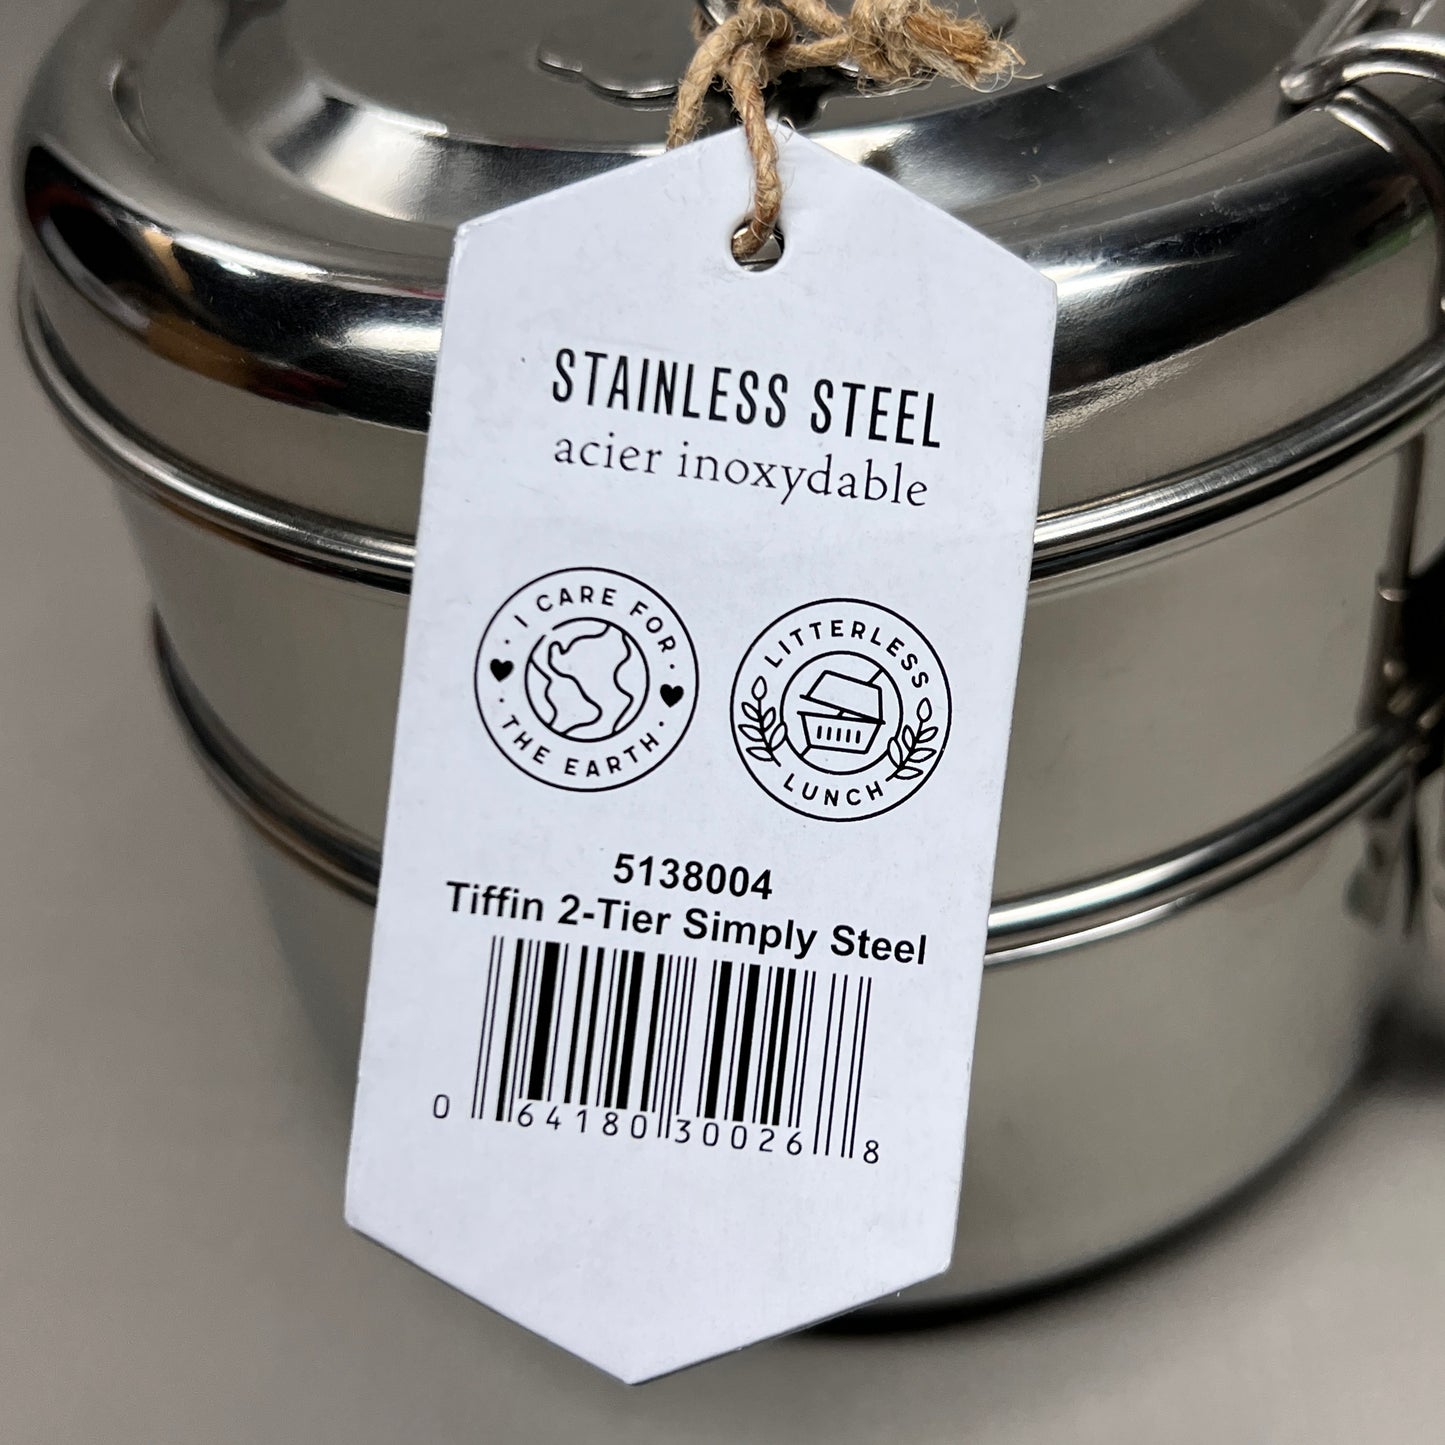 NOW DESIGNS Tiffin 2-Tier Simply Stainless Steel Food Container 5" x 6" 5138004 (New)